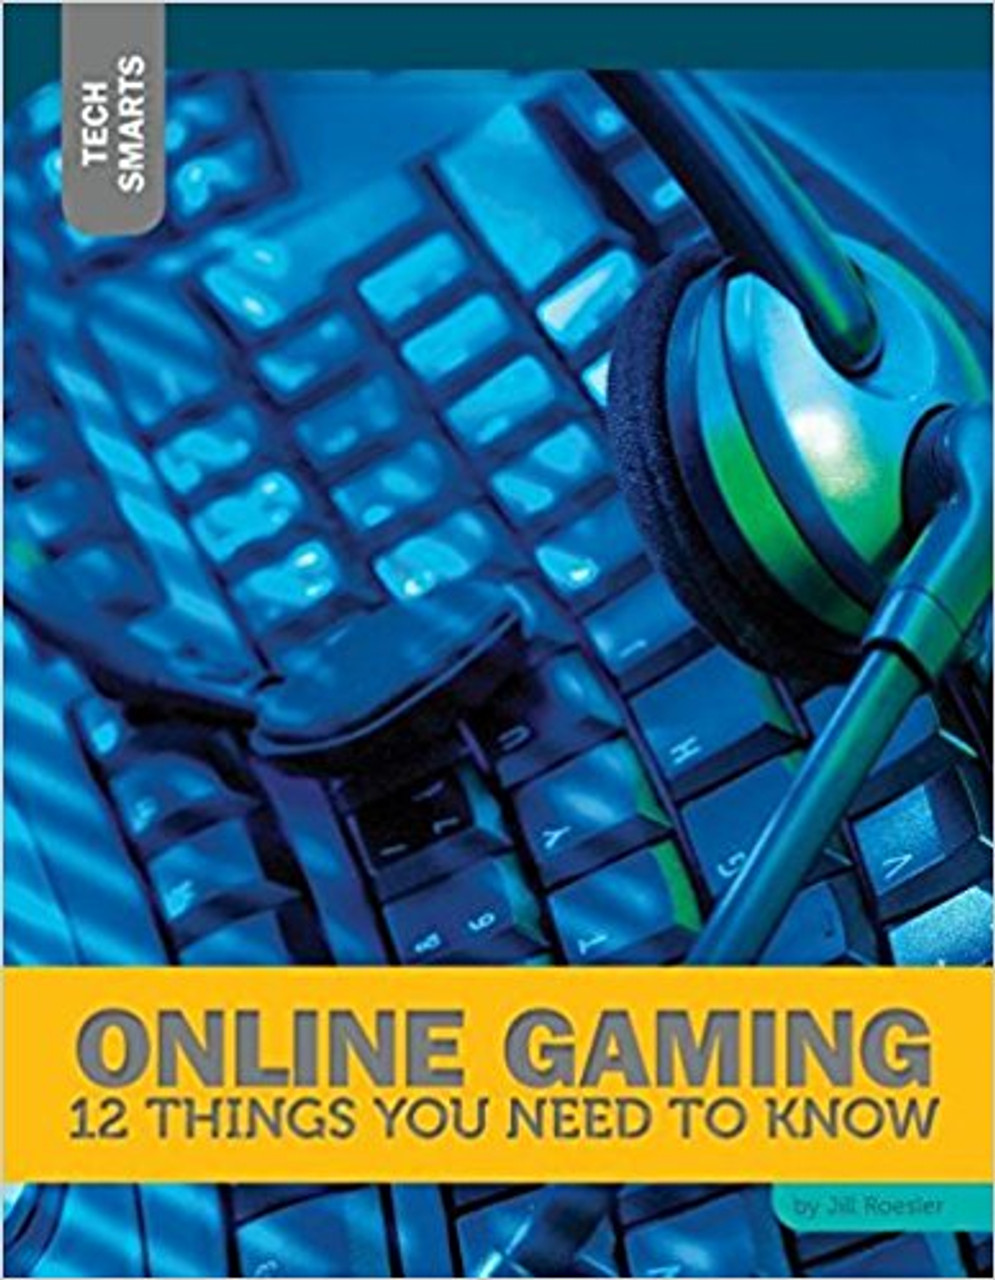 Online Gaming: 12 Things You Need to Know by Jill Roesler